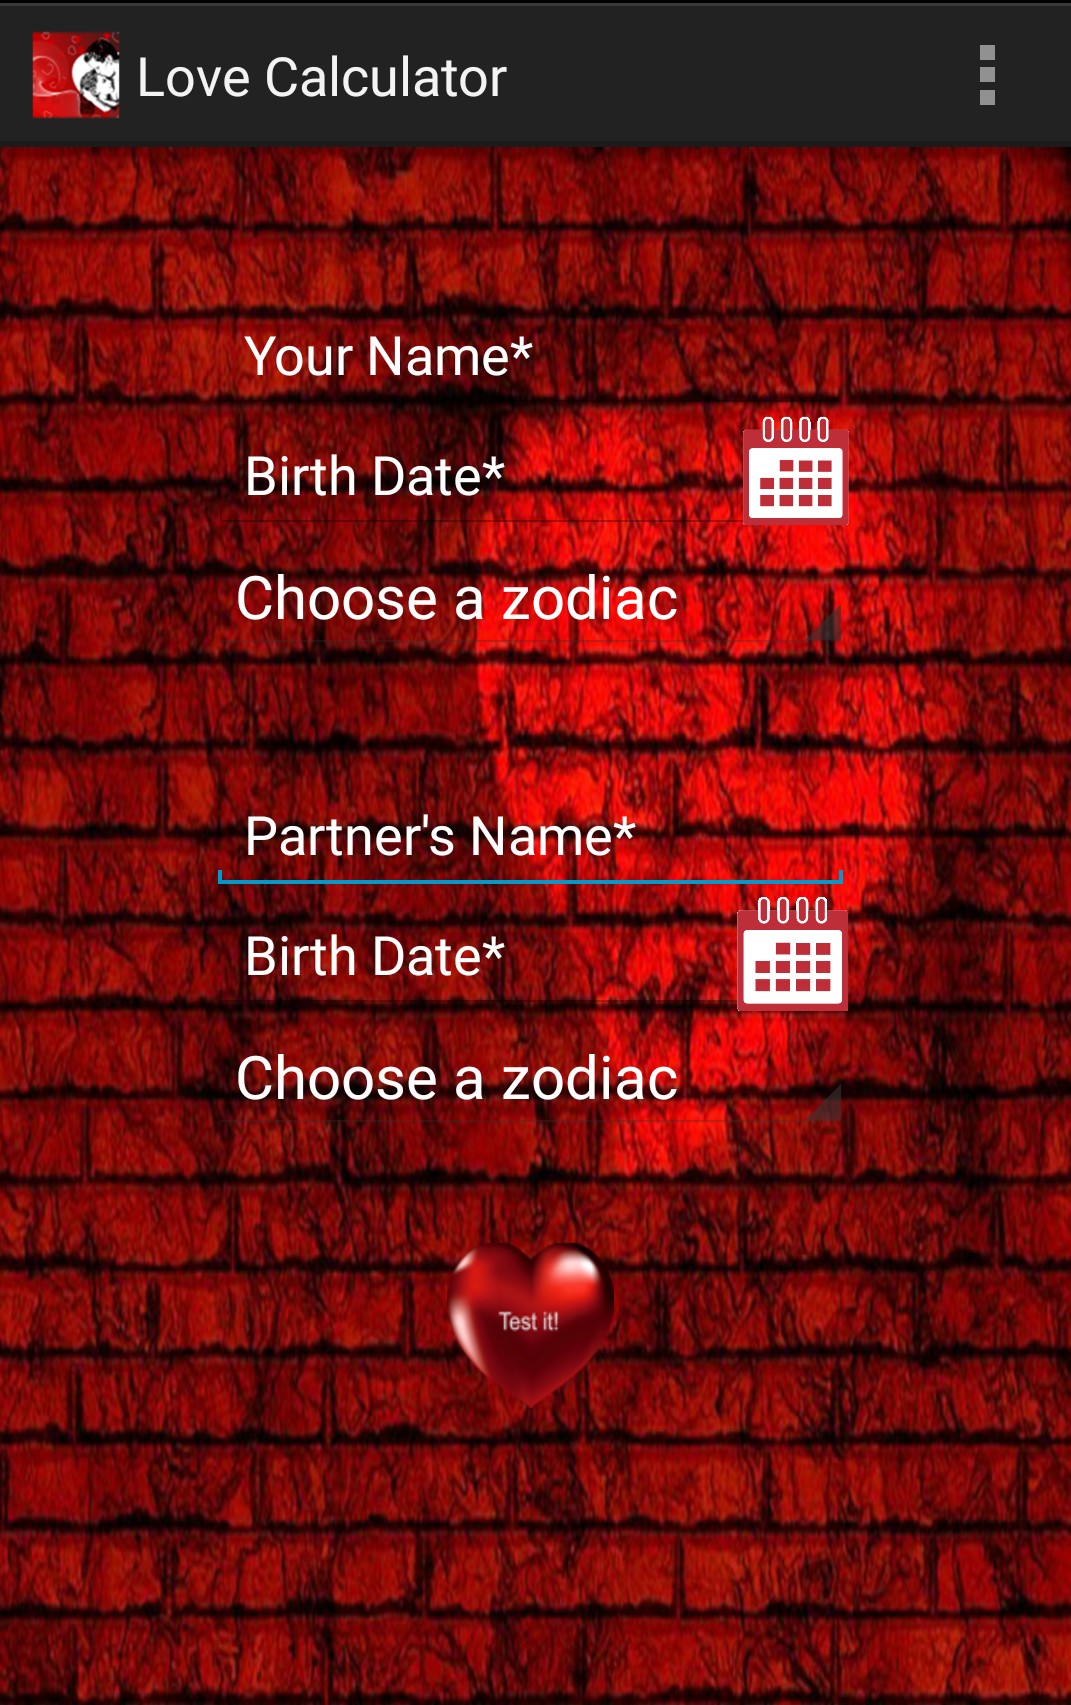 Trusted love calculator for couples.